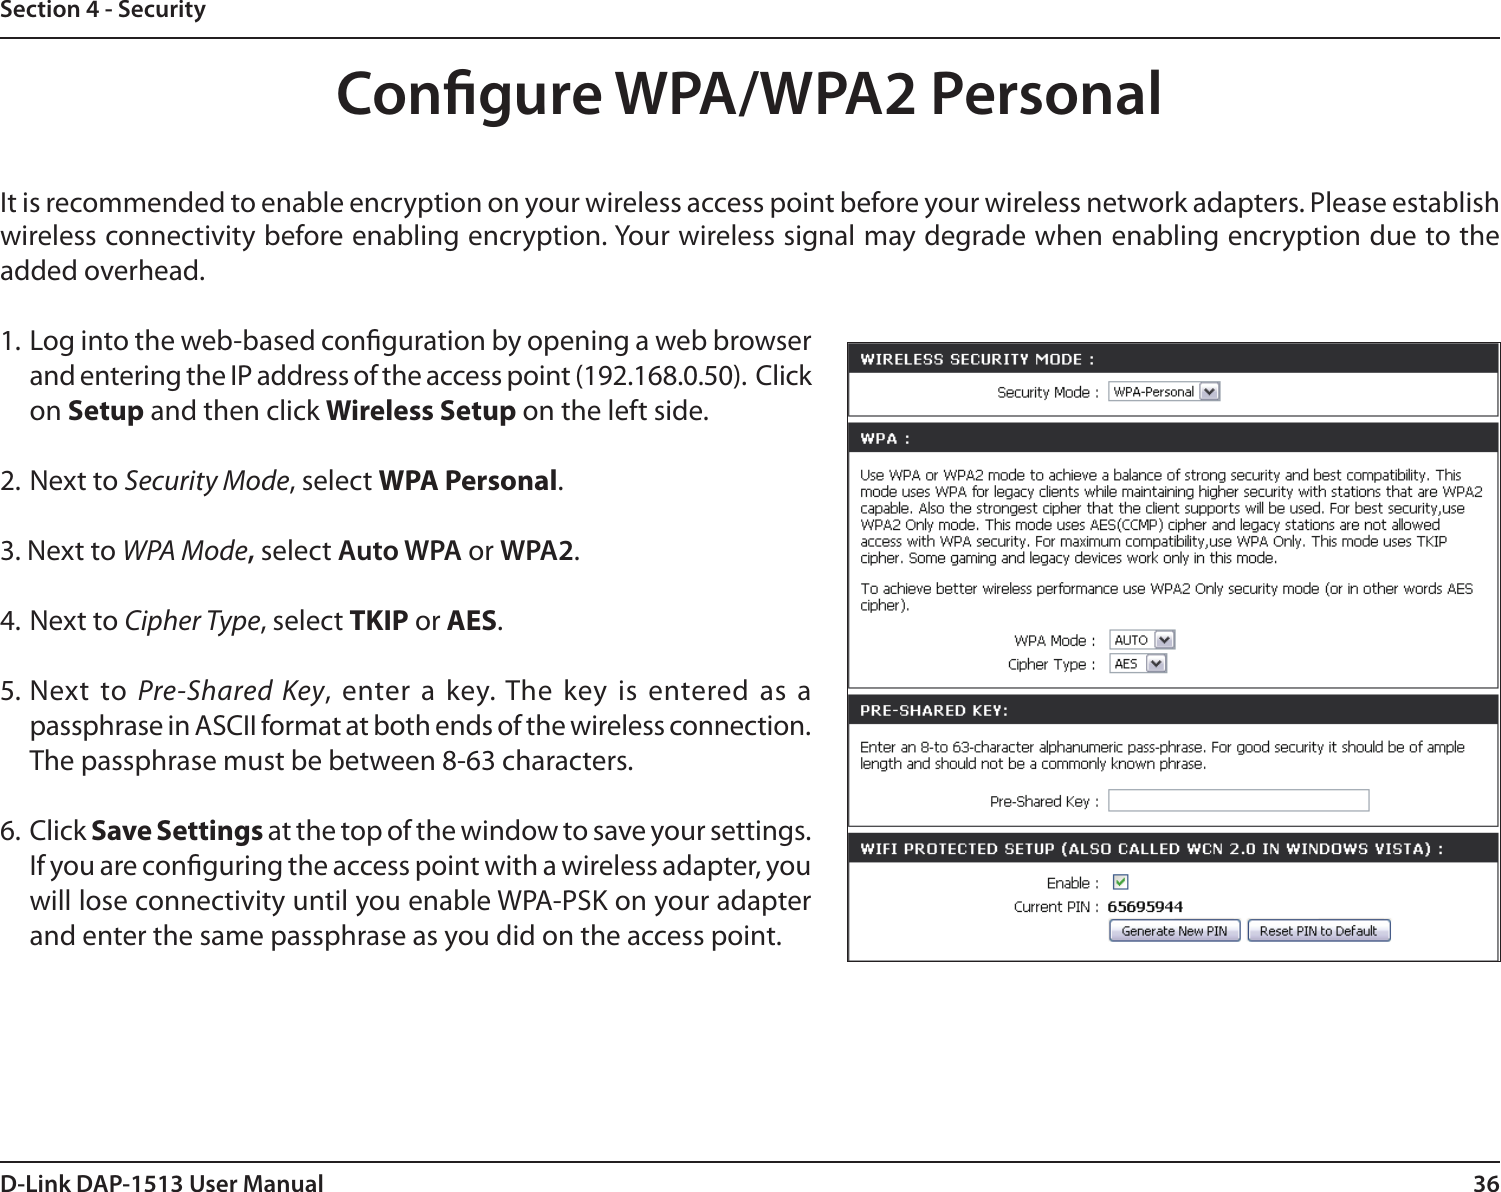 36D-Link DAP-1513 User ManualSection 4 - SecurityCongure WPA/WPA2 PersonalIt is recommended to enable encryption on your wireless access point before your wireless network adapters. Please establish wireless connectivity before enabling encryption. Your wireless signal may degrade when enabling encryption due to the added overhead.1. Log into the web-based conguration by opening a web browser and entering the IP address of the access point (192.168.0.50).  Click on Setup and then click Wireless Setup on the left side.2. Next to Security Mode, select WPA Personal.3. Next to WPA Mode, select Auto WPA or WPA2.4. Next to Cipher Type, select TKIP or AES.5. Next  to  Pre-Shared  Key, enter a  key. The key is  entered as a passphrase in ASCII format at both ends of the wireless connection. The passphrase must be between 8-63 characters. 6. Click Save Settings at the top of the window to save your settings. If you are conguring the access point with a wireless adapter, you will lose connectivity until you enable WPA-PSK on your adapter and enter the same passphrase as you did on the access point.